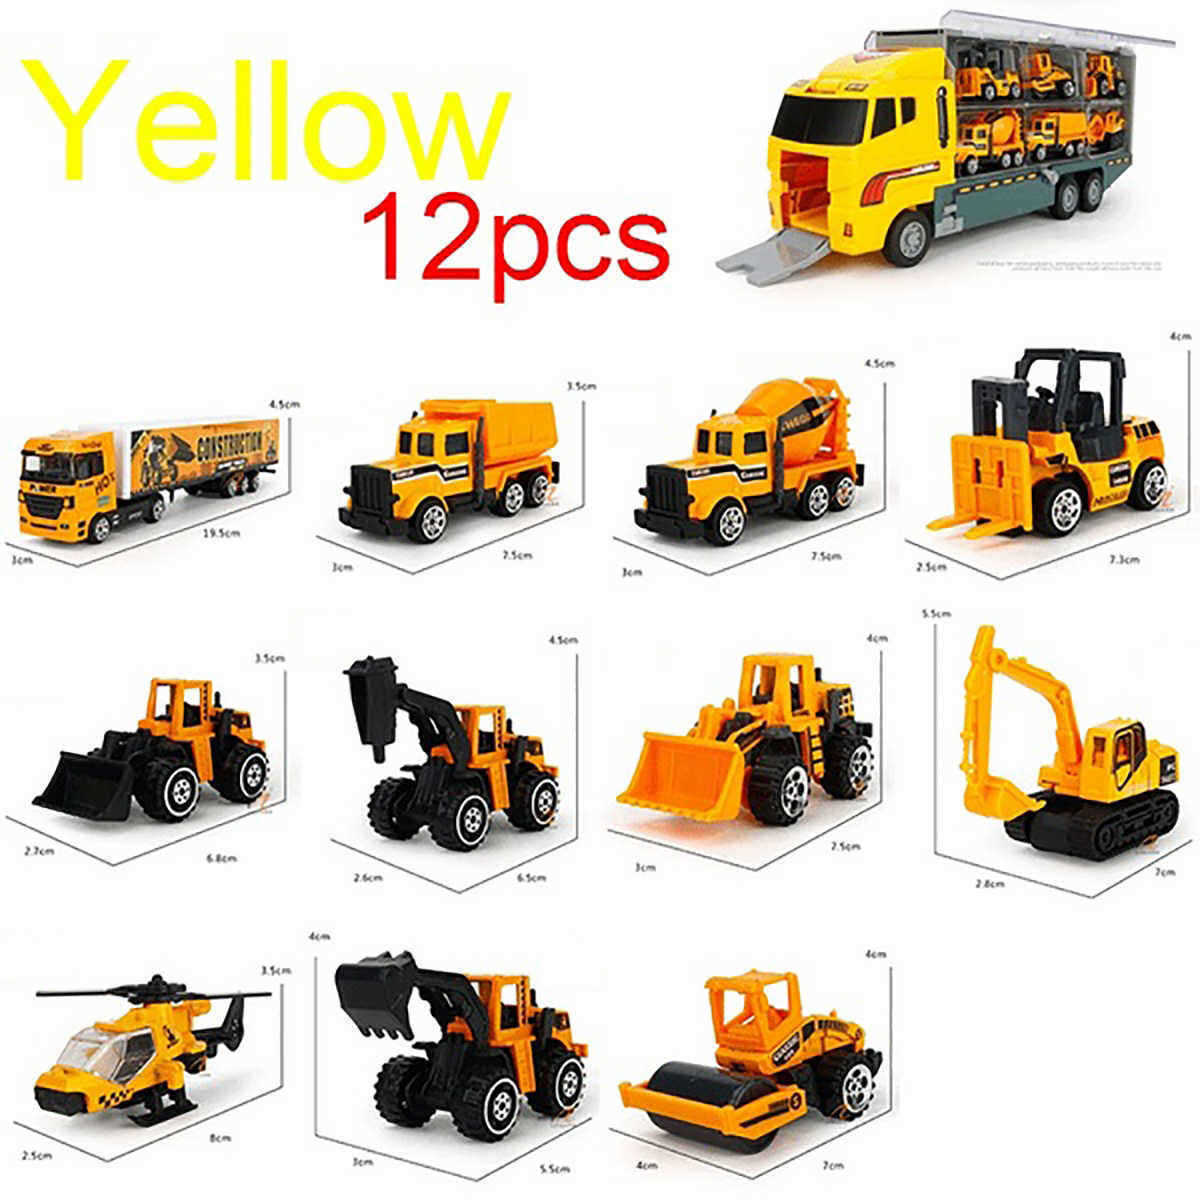 612-PCS-11-In-1-Diecast-Construction-Truck-Vehicle-Car-Model-Toy-Set-Play-Vehicles-in-Carrier-Truck-1557376